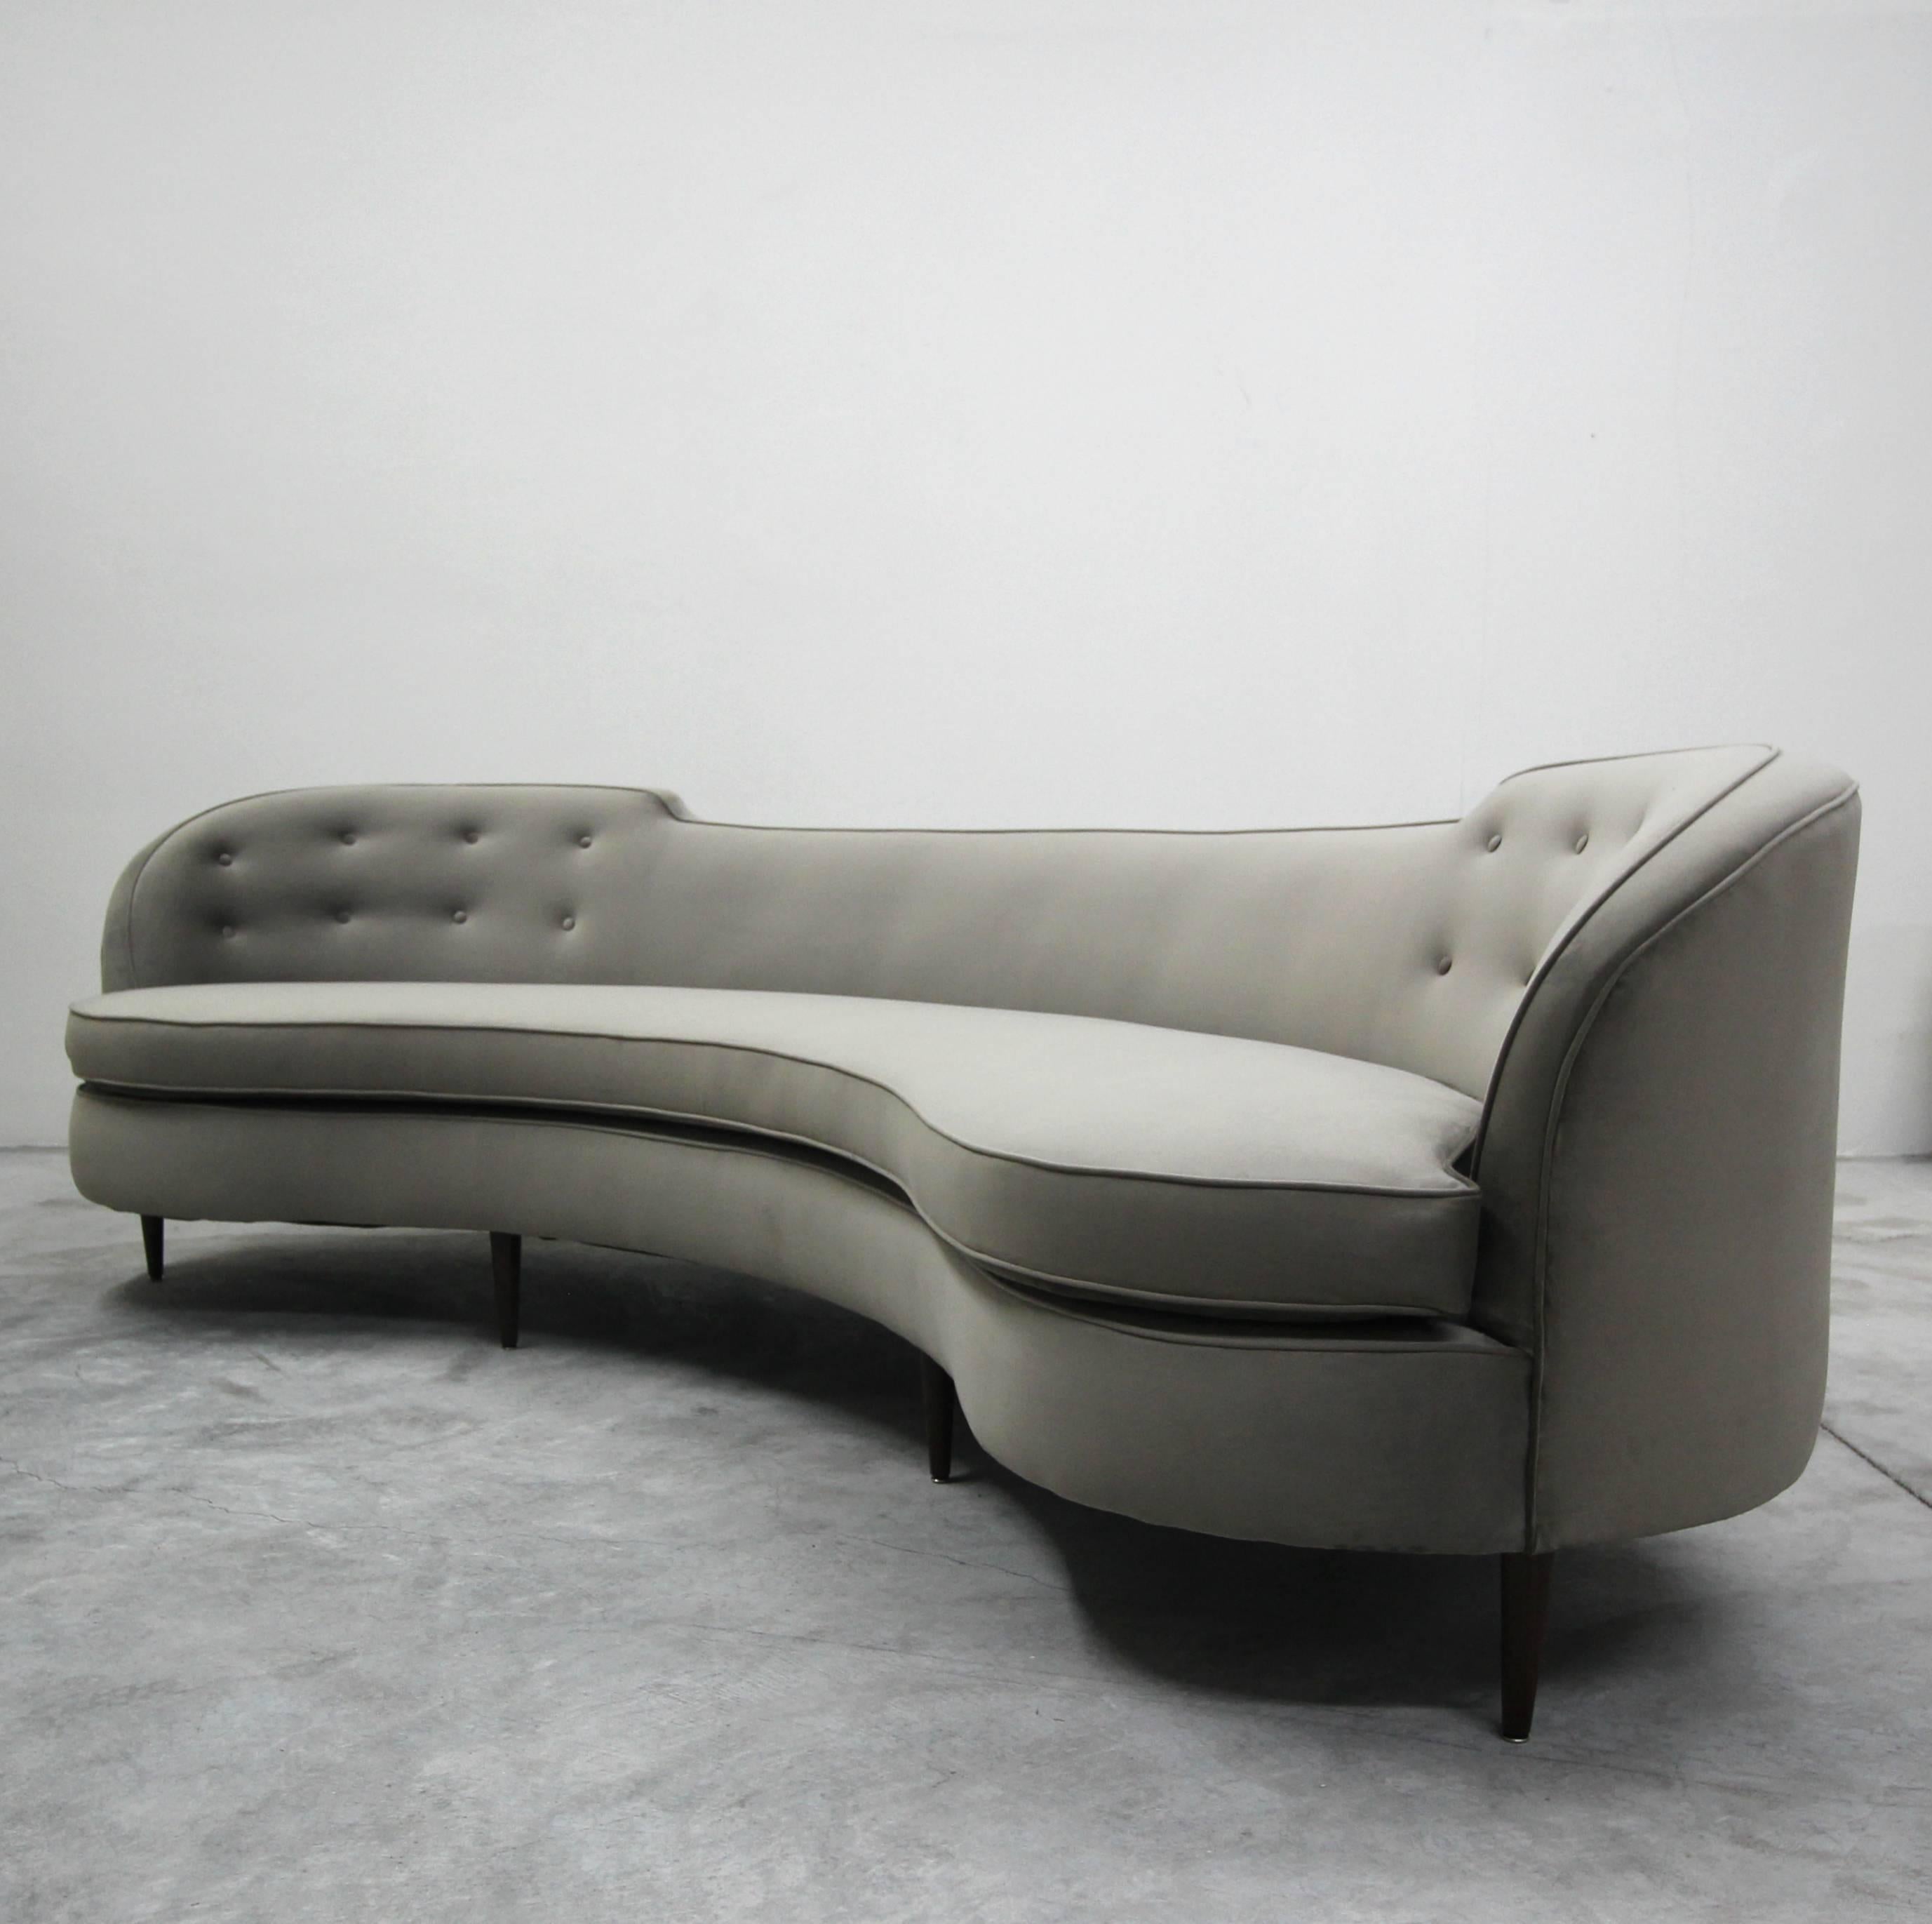 A rare classic to behold in this stunning vintage Edward Wormley for Dunbar sofa. Why settle for a modern replica when you can have the quality and authenticity of the real deal. The rounded lines of this gorgeous sofa combined with its large size